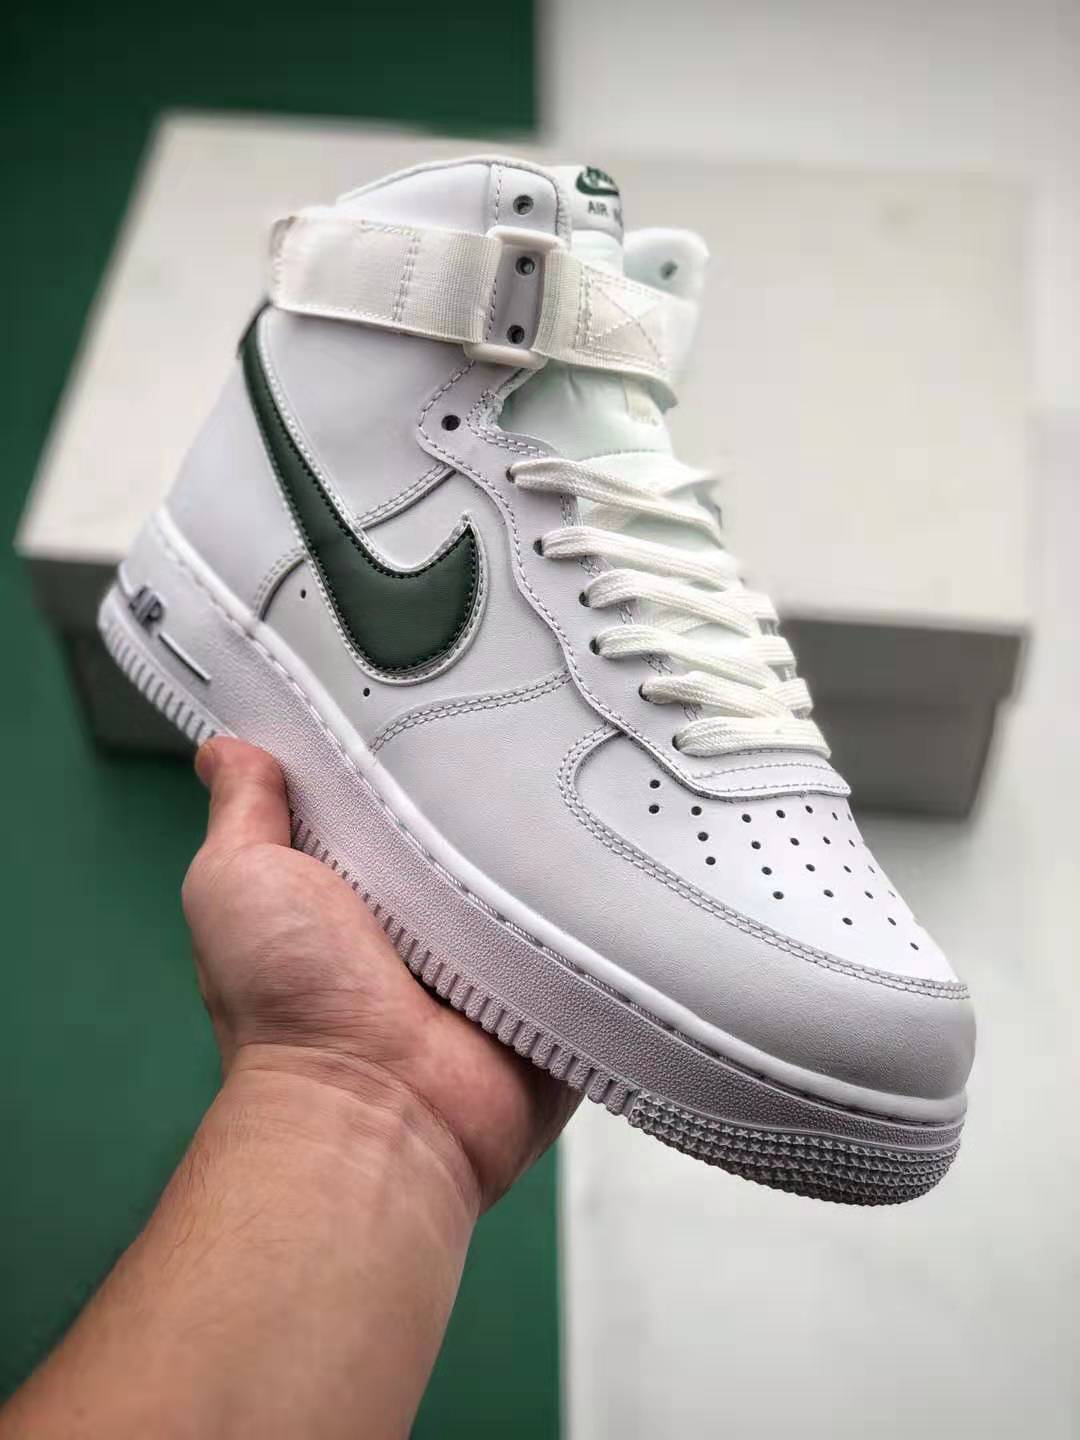 Nike Air Force 1 High 07 LV8 3 White Green AT4141-104 - Trendy and Stylish Footwear